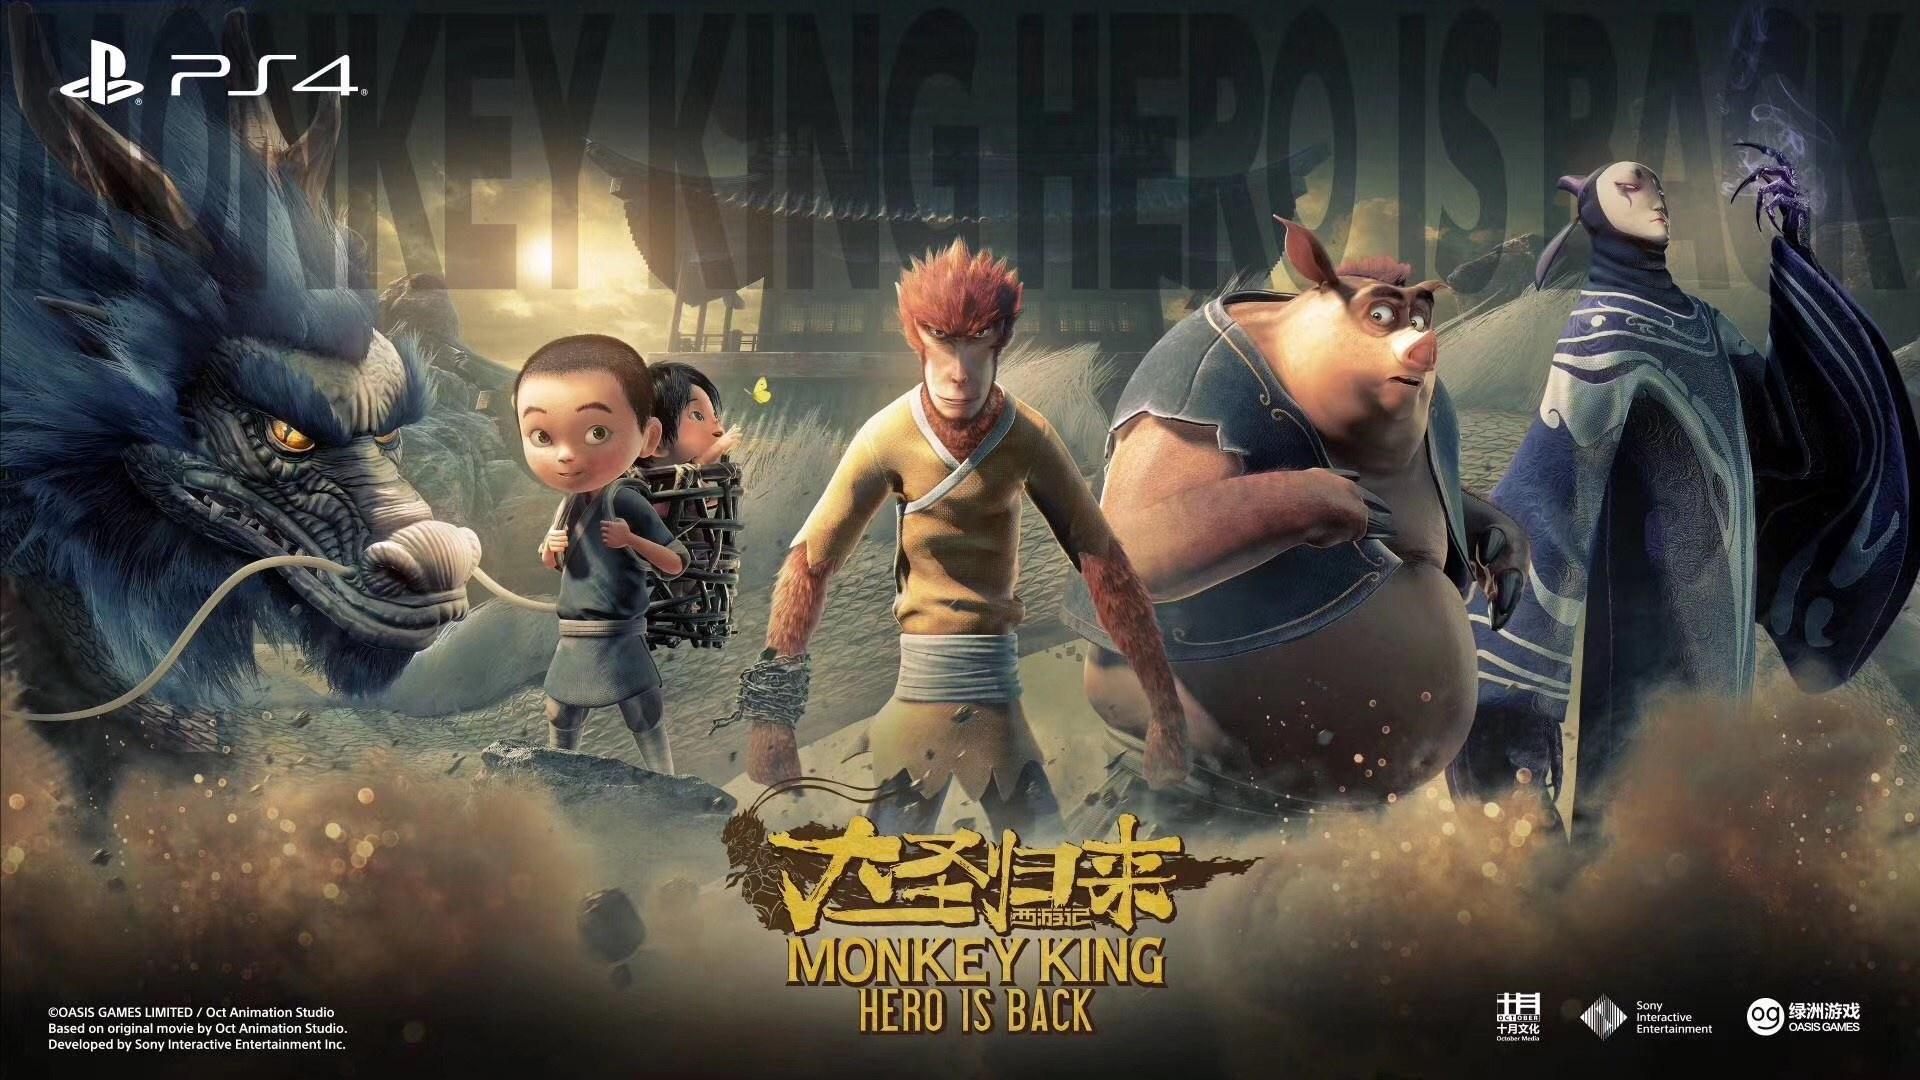 Monkey King: Hero is Back with a great trailer and gameplay reveals